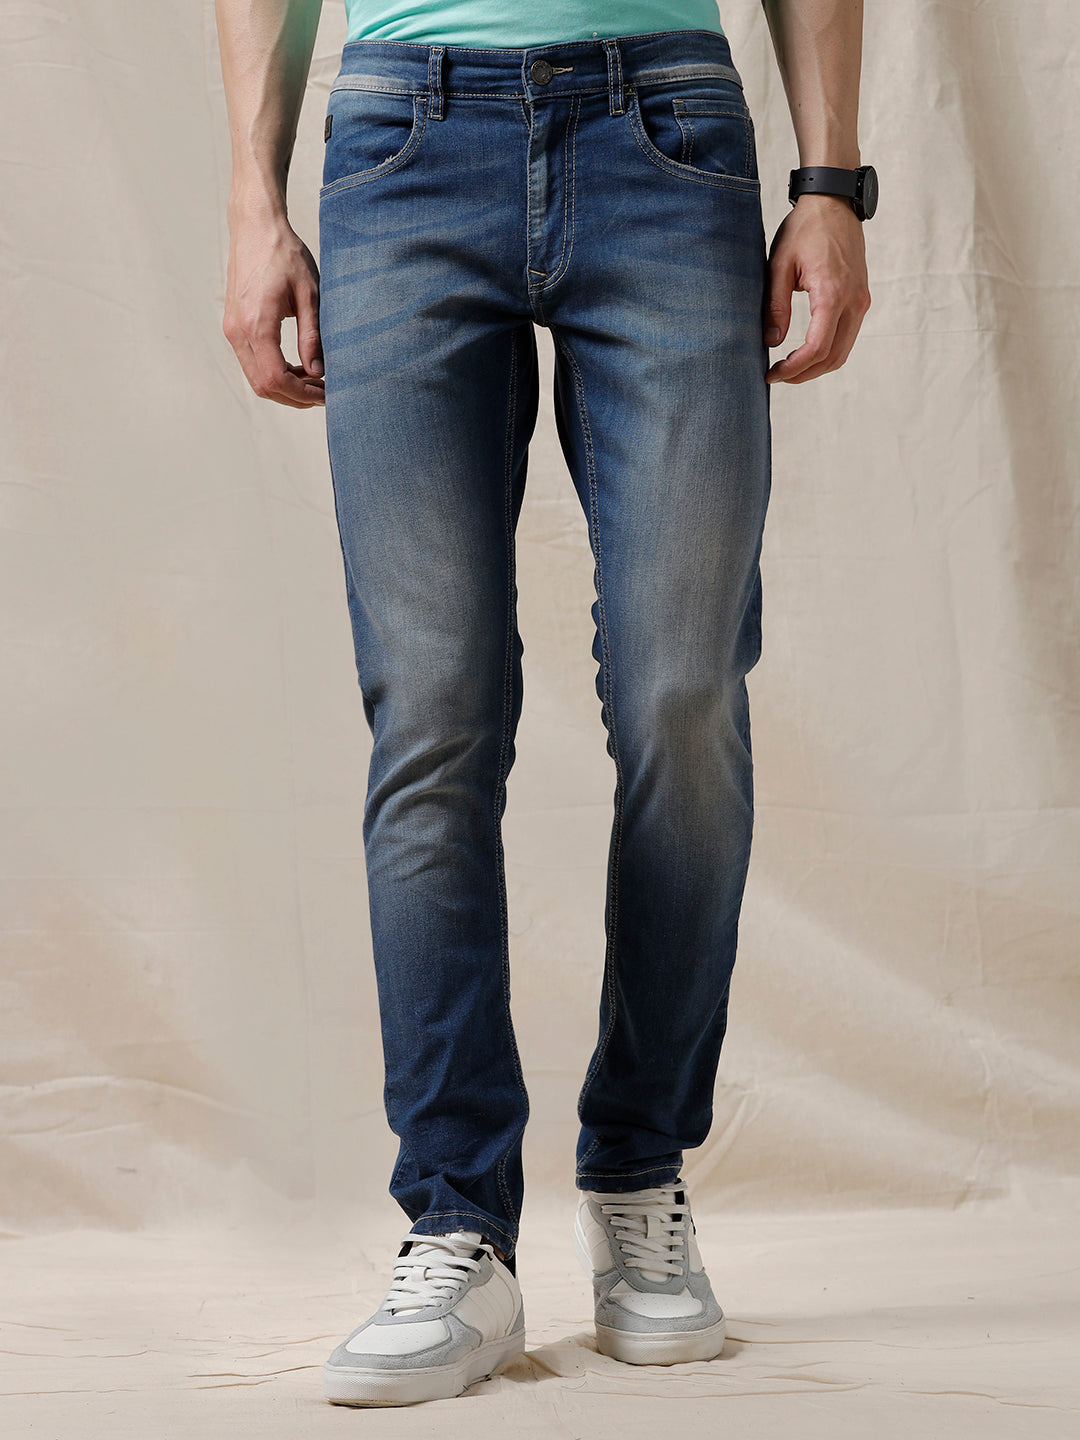 Casual Mid Tone Fade Jeans